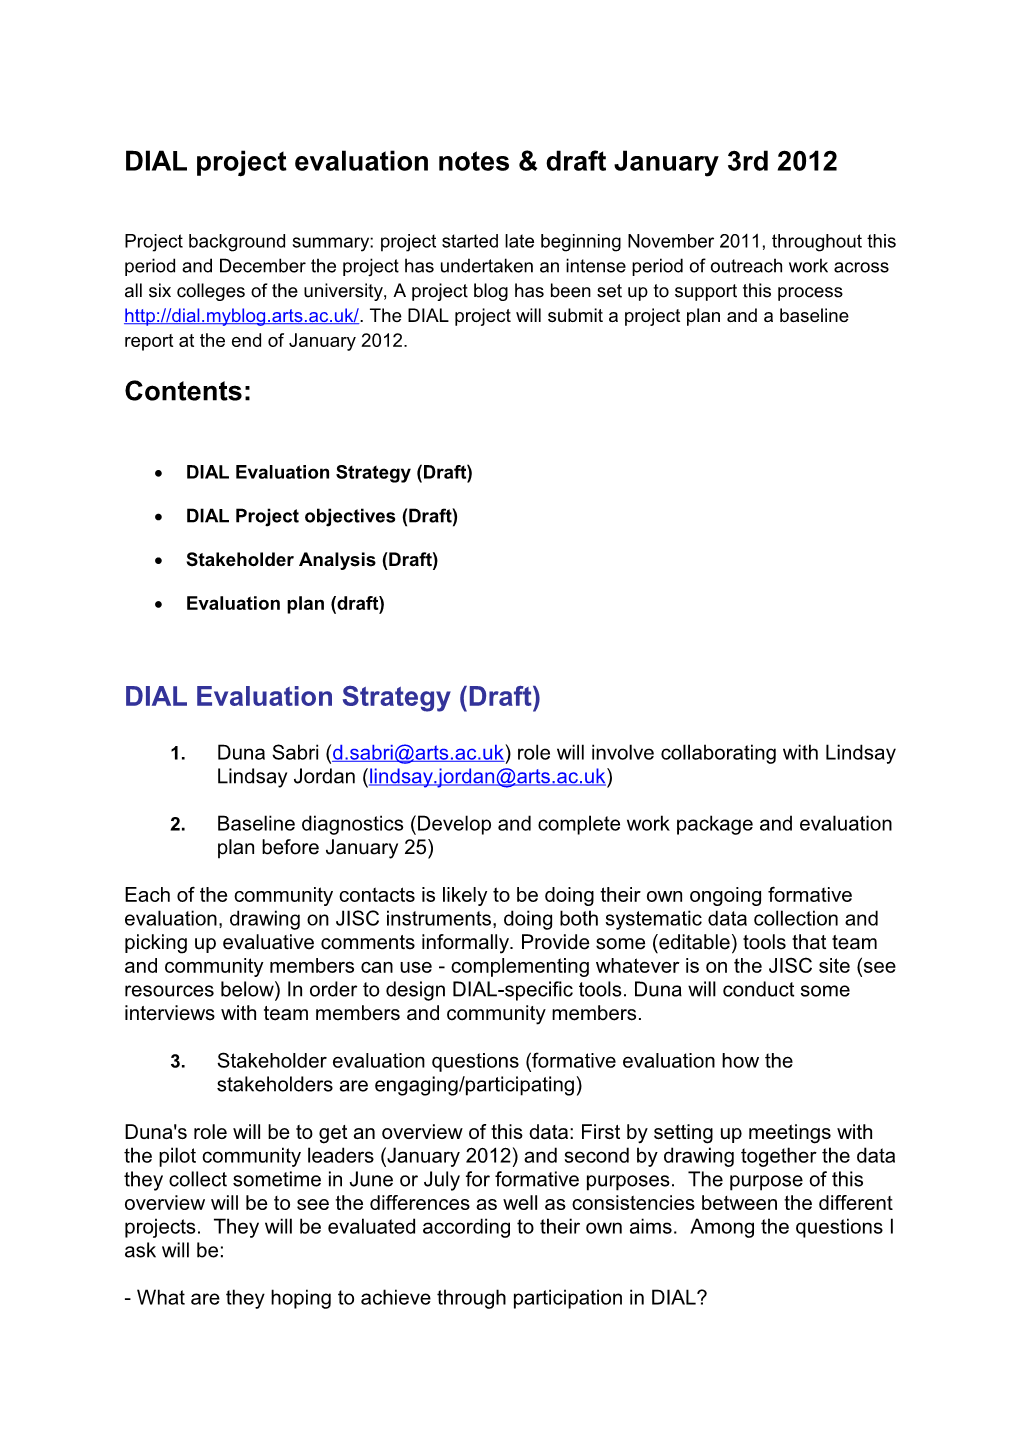 DIAL Project Evaluation Notes & Draft January 3Rd 2012